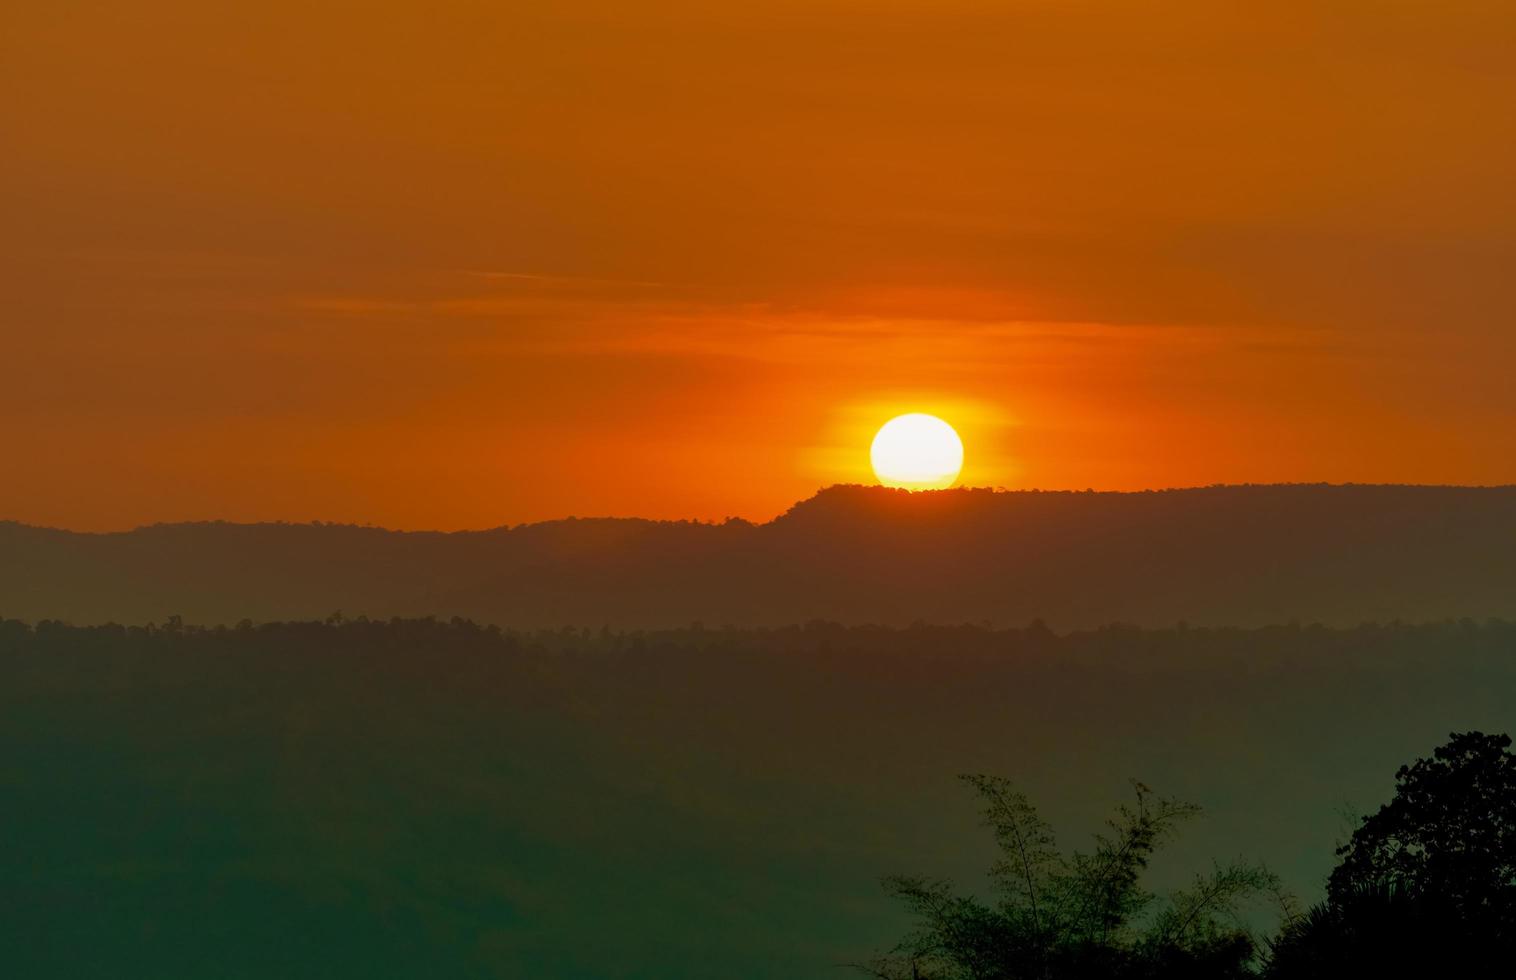 Beautiful nature landscape of mountain with sunset sky and clouds. Scenery of mountain layer at dusk with big round sun. Natural background. Orange and red sky in the evening. Sunset sky background. photo